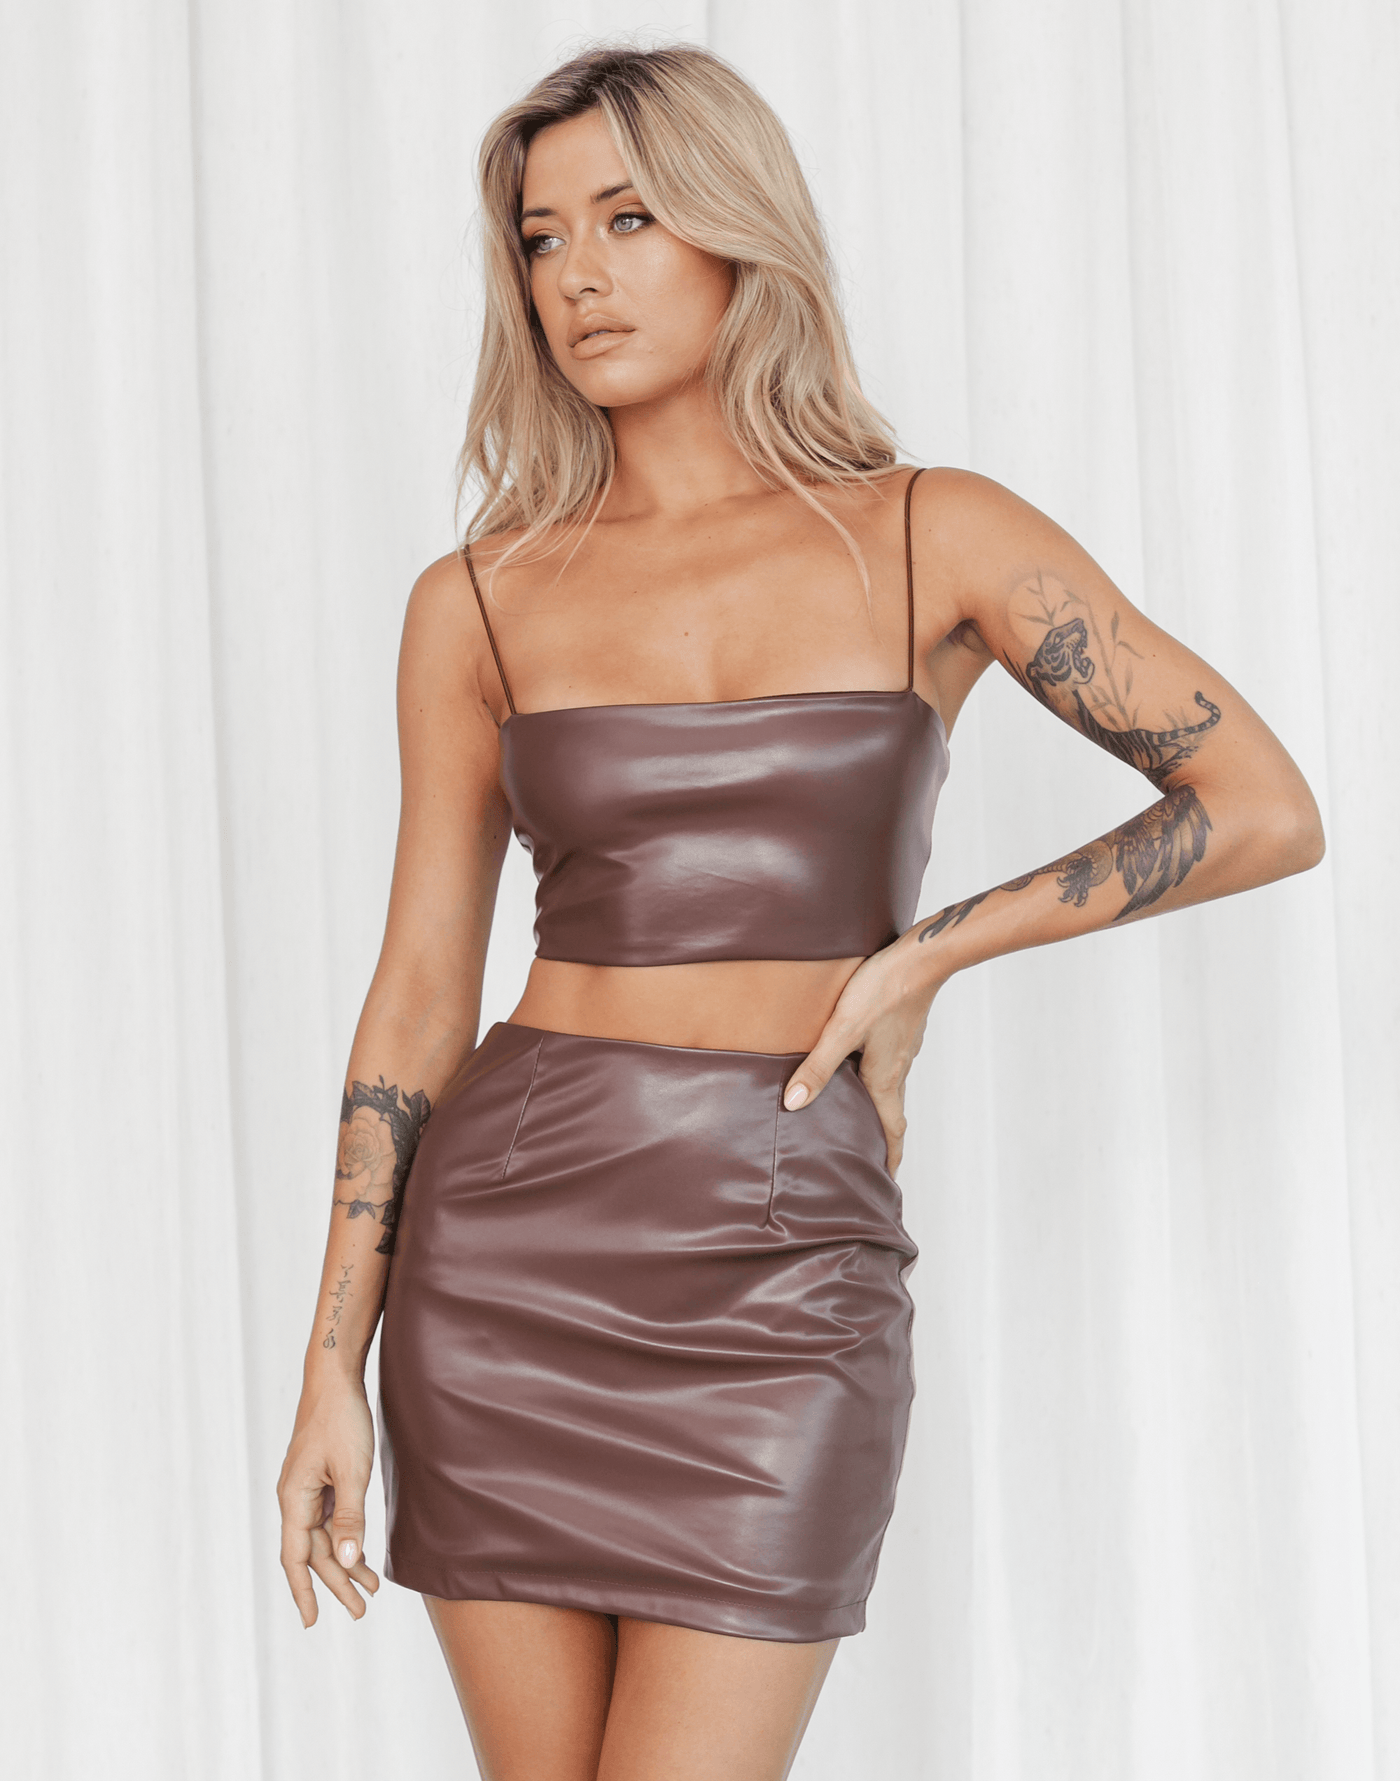 Chicago Crop Top (Brown) - Faux Leather Crop Top - Women's Top - Charcoal Clothing